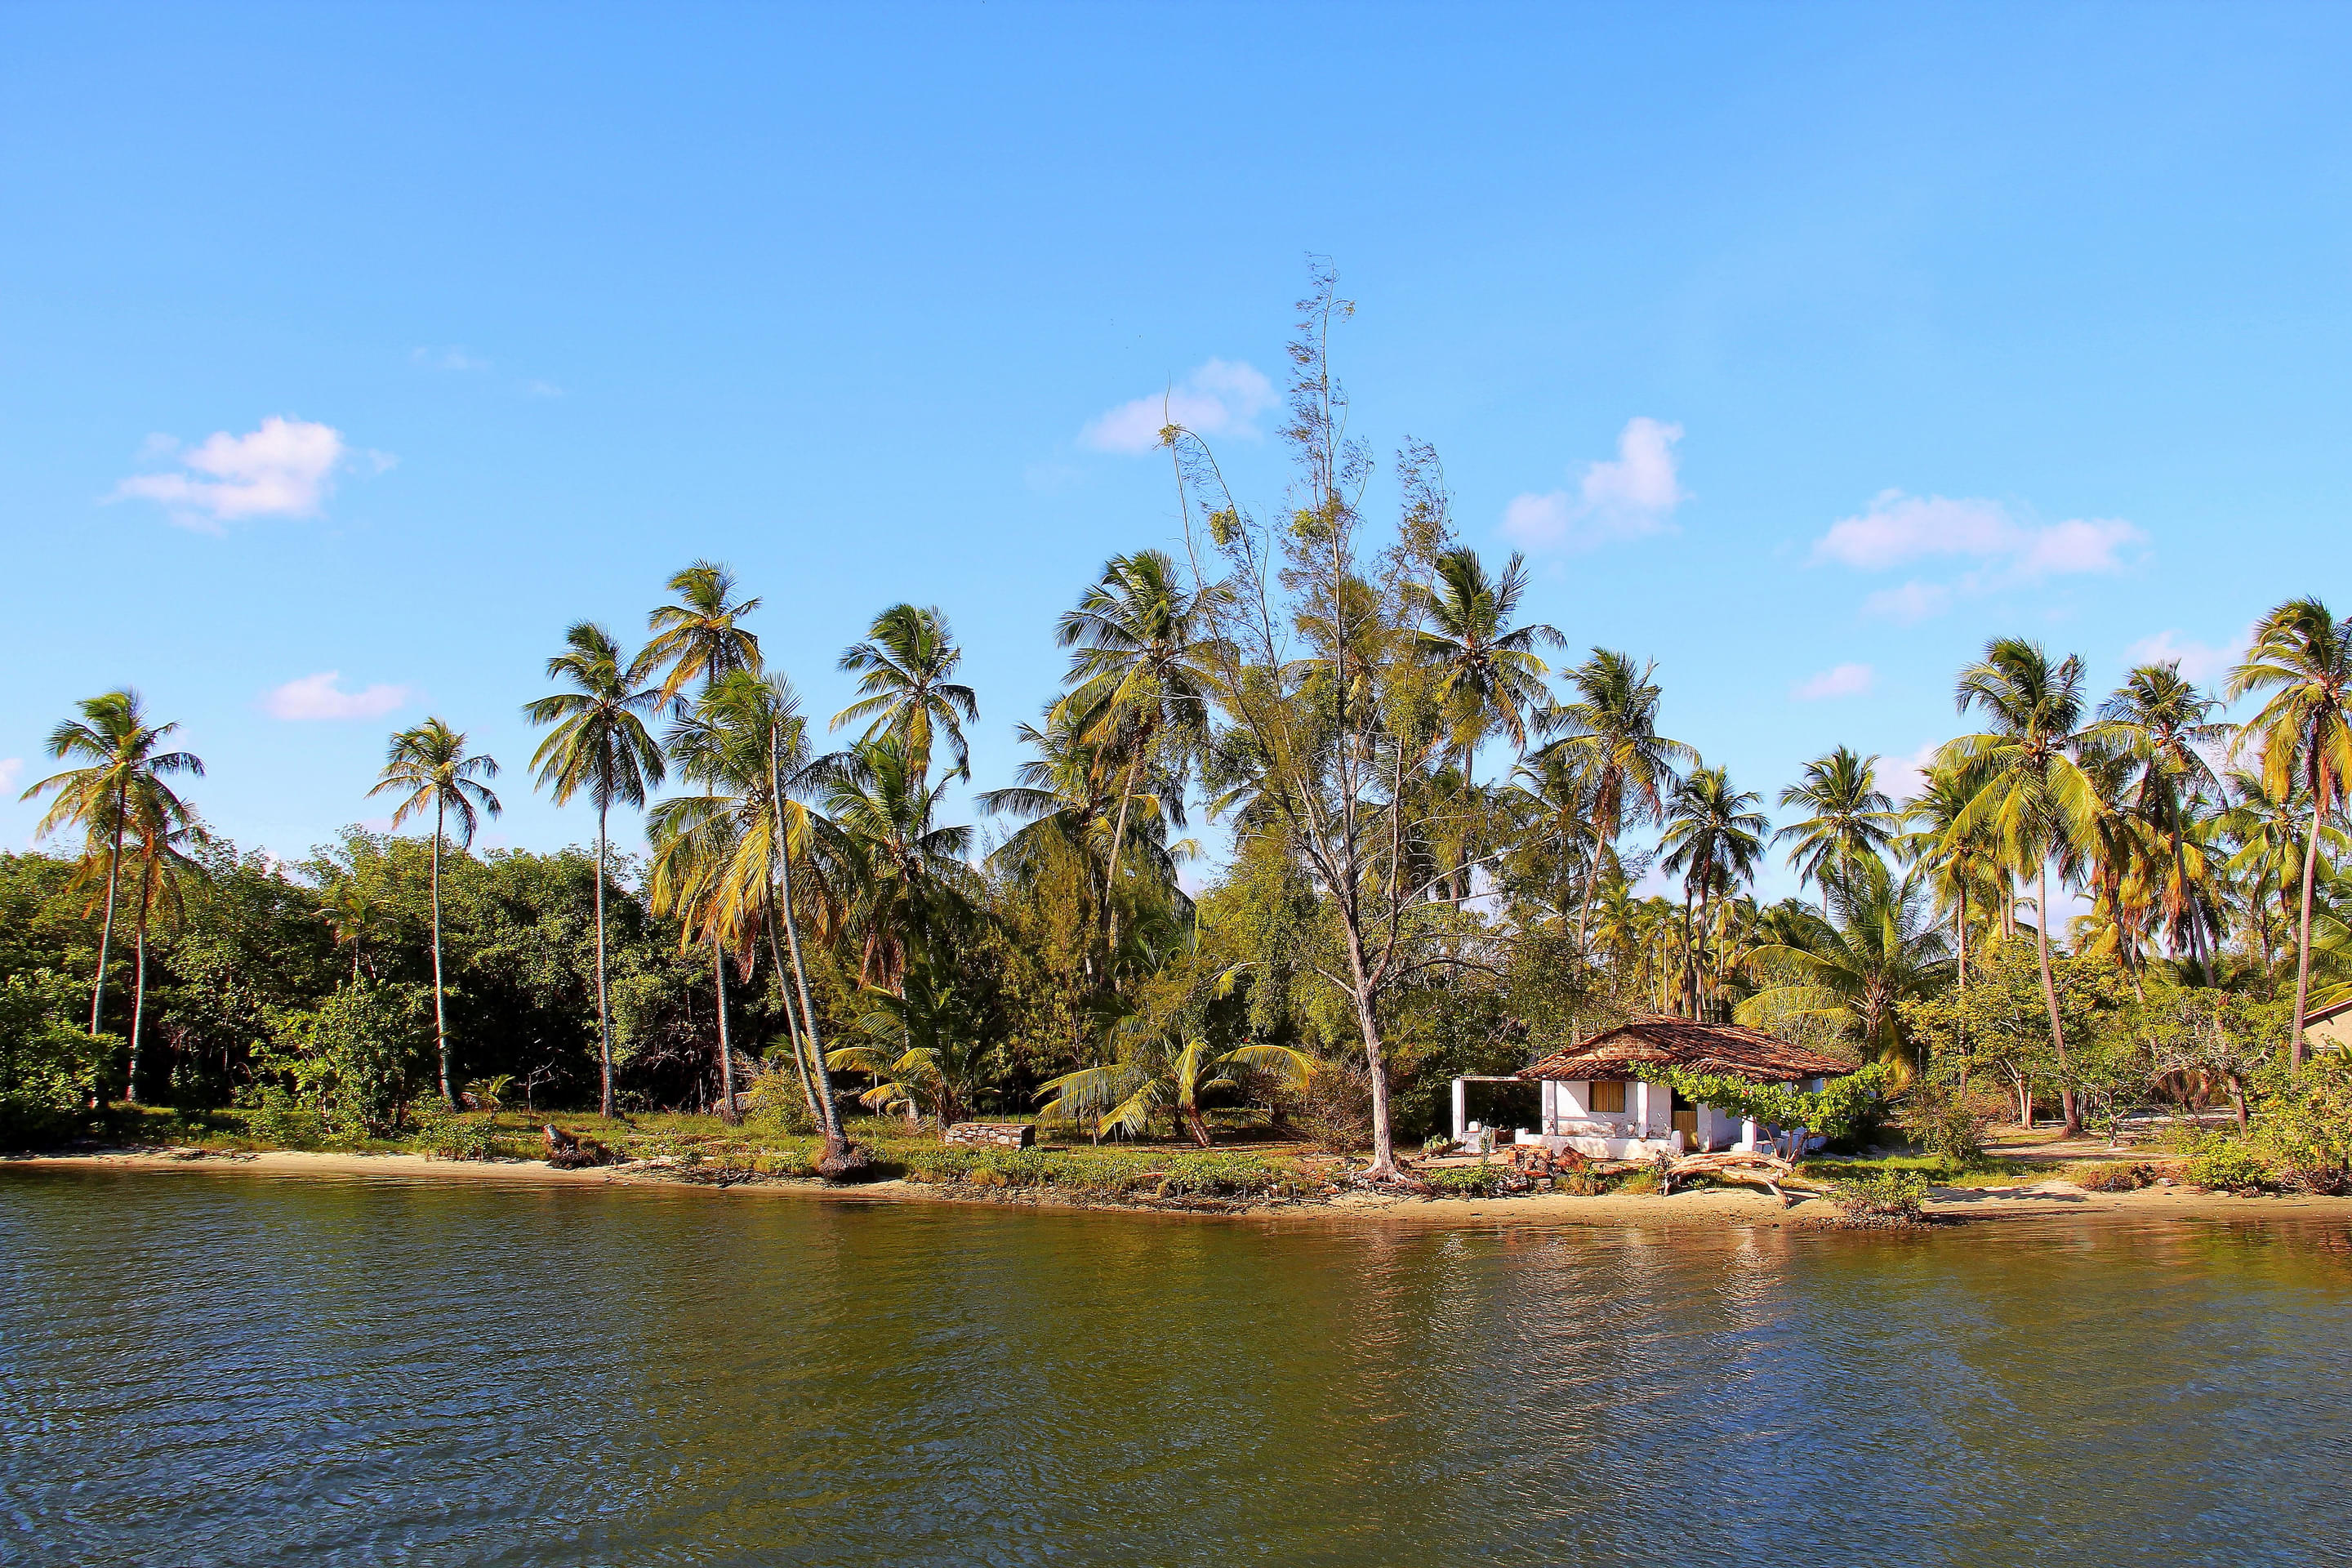 Beira Lake Overview